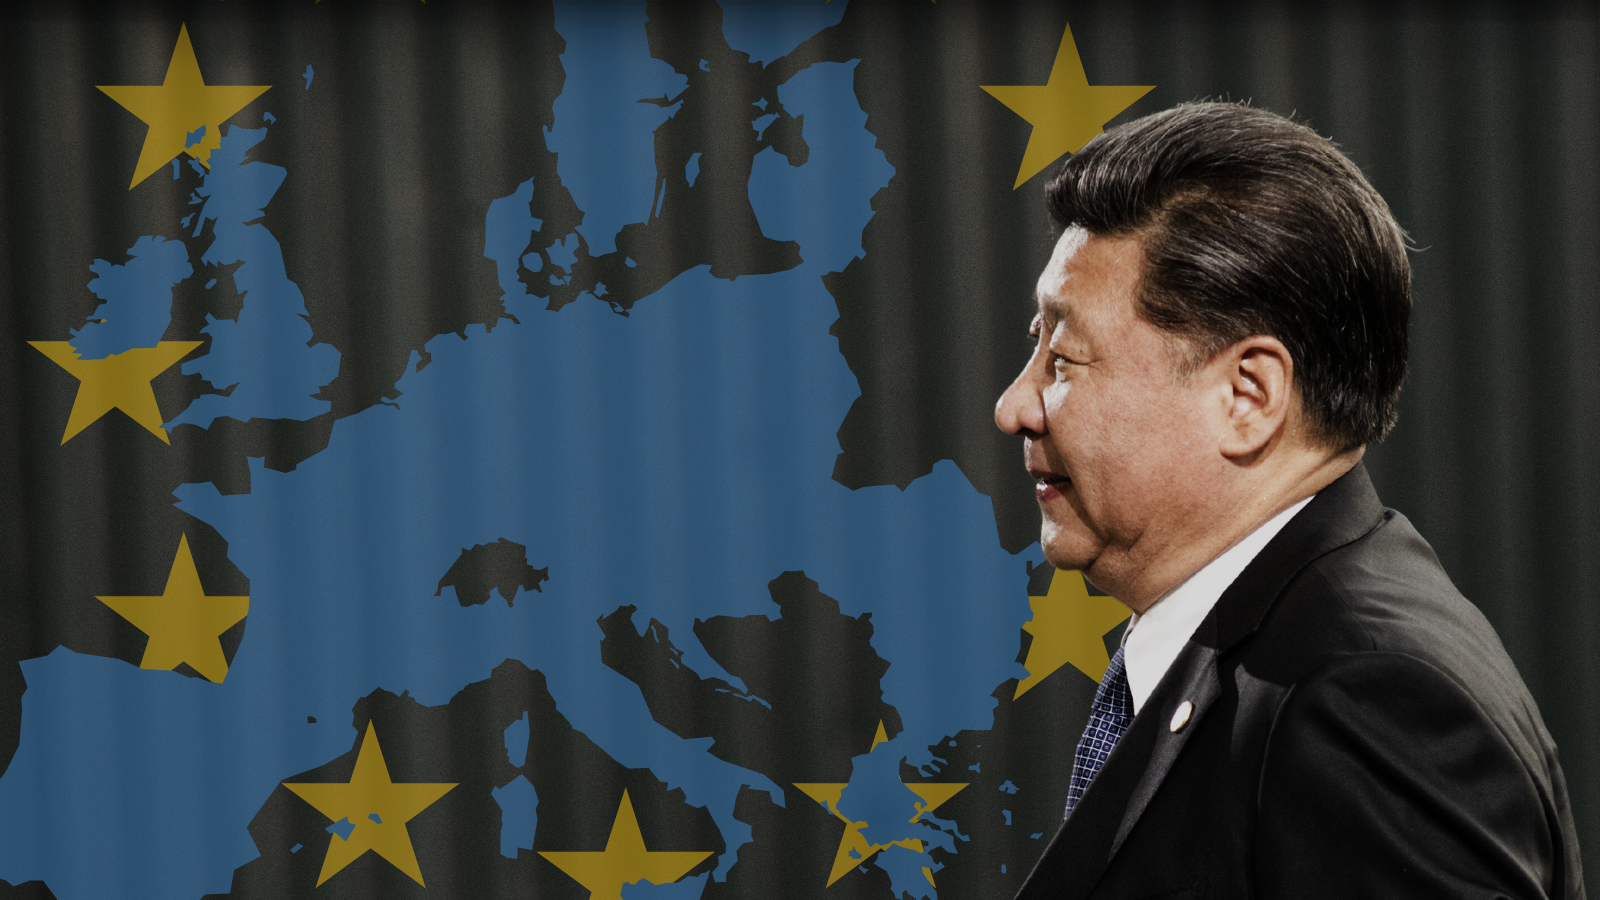 Xi Jinping in Europe. What Makes His Trip So Special?